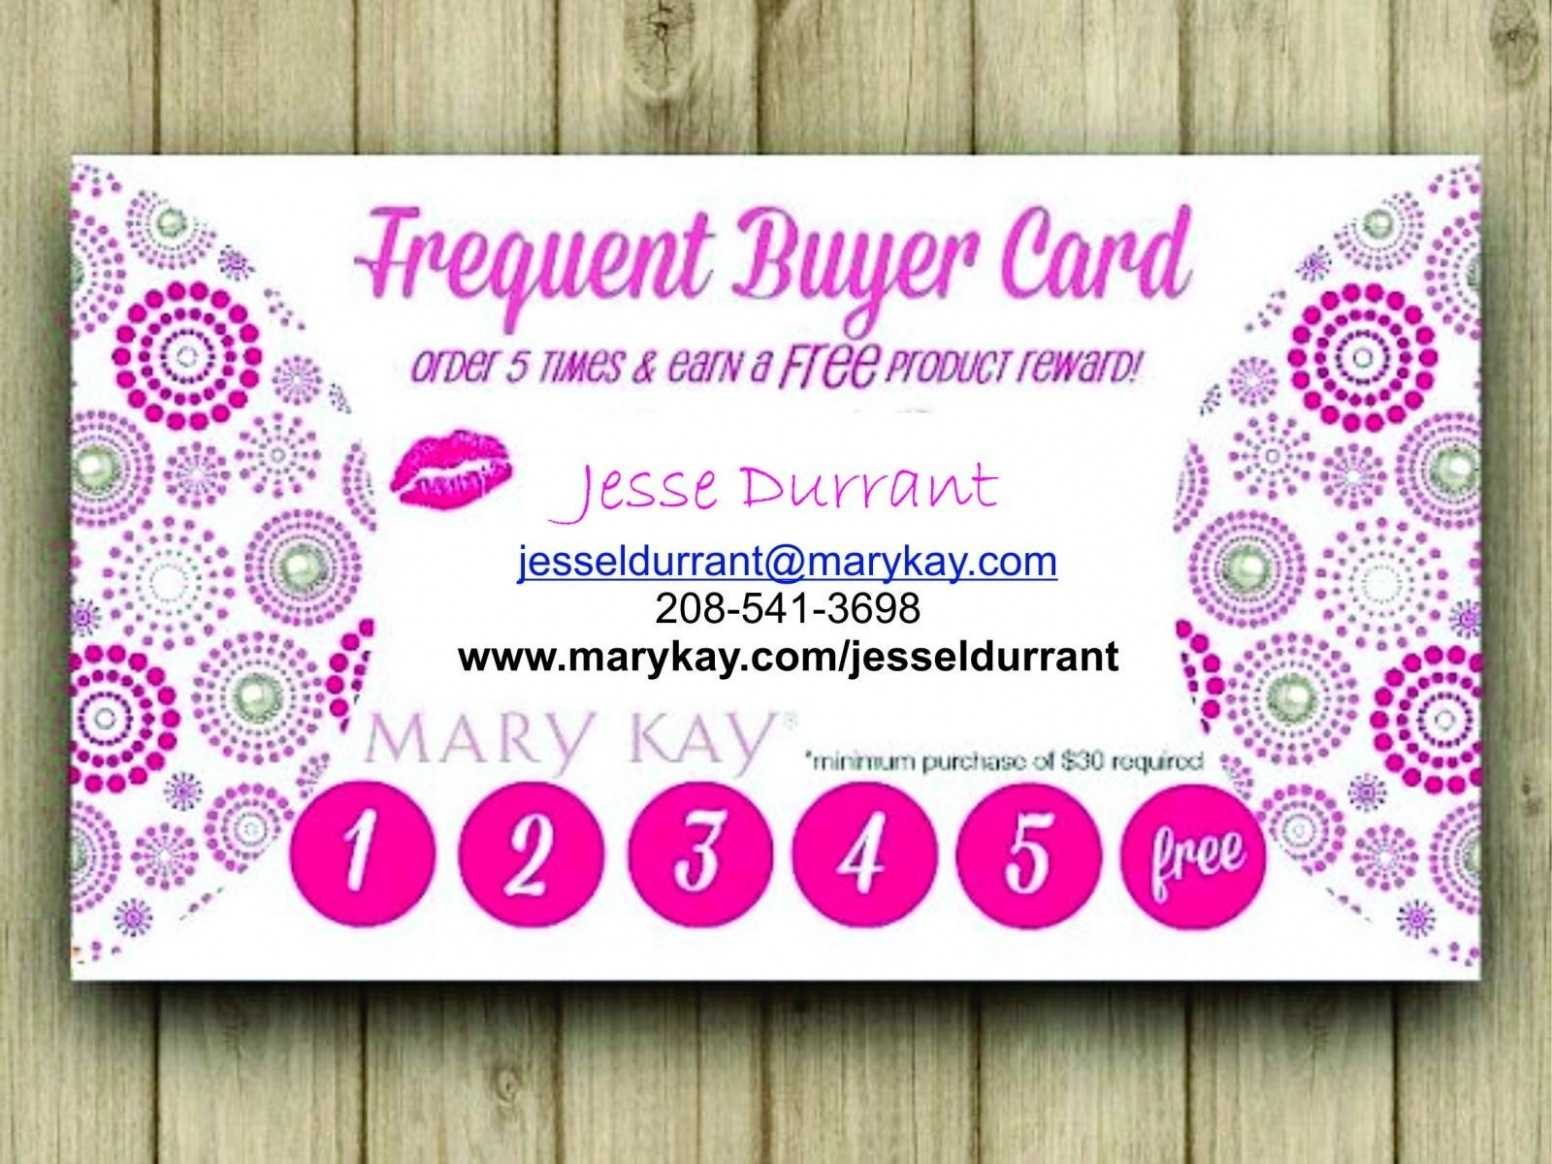 Mary Kay Business Cards | Business Cards Throughout Mary Kay Business Cards Templates Free